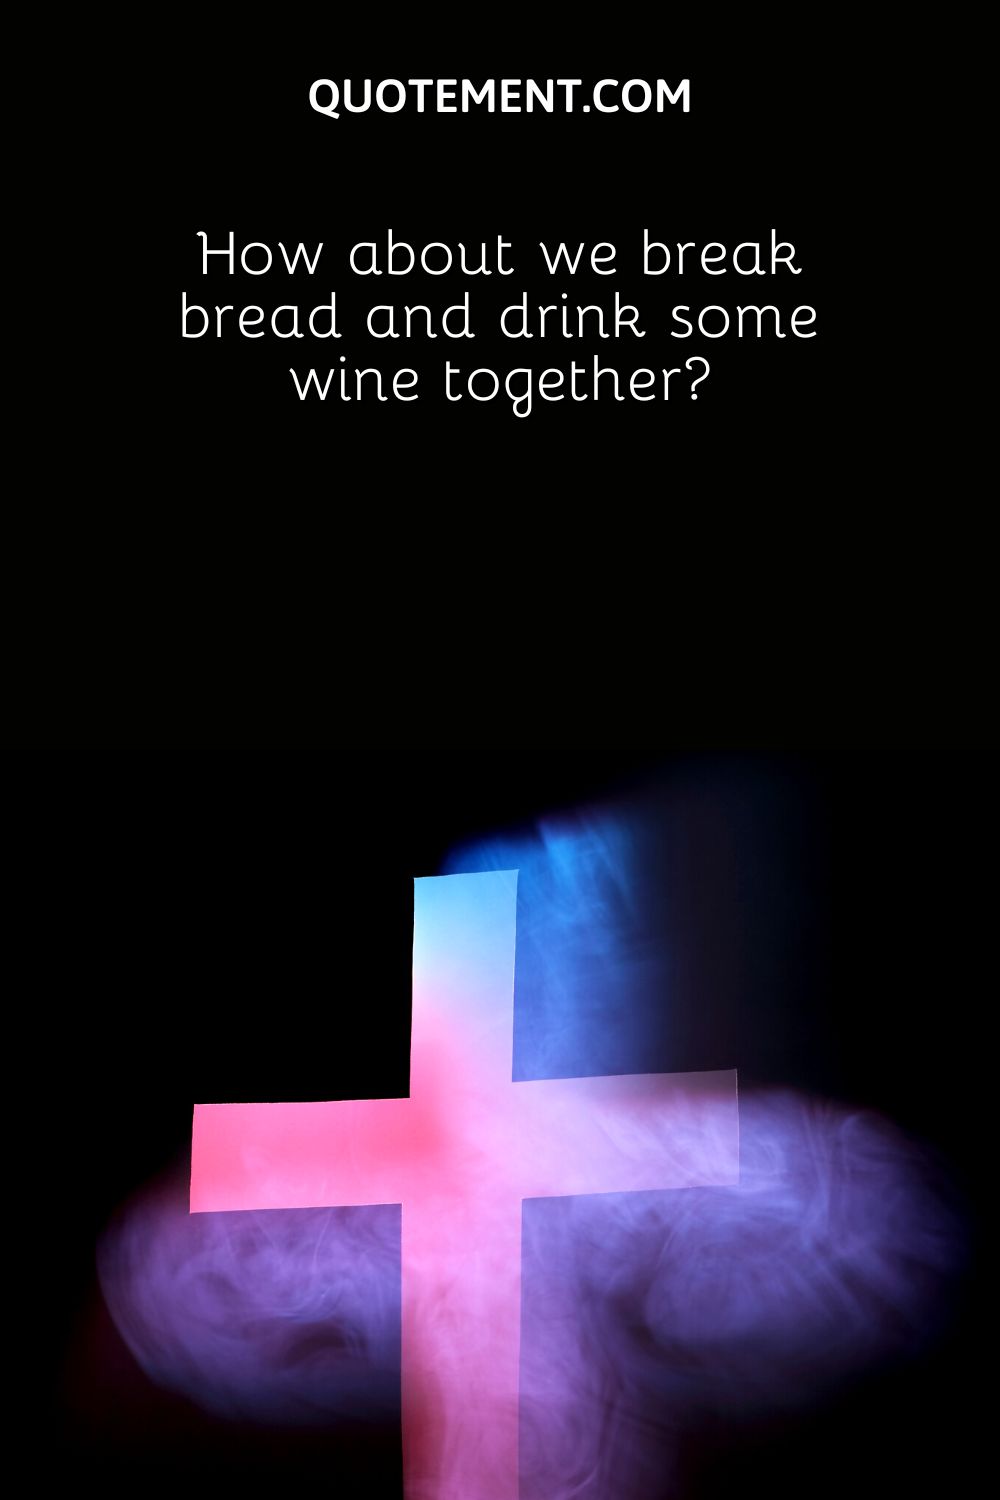 How about we break bread and drink some wine together